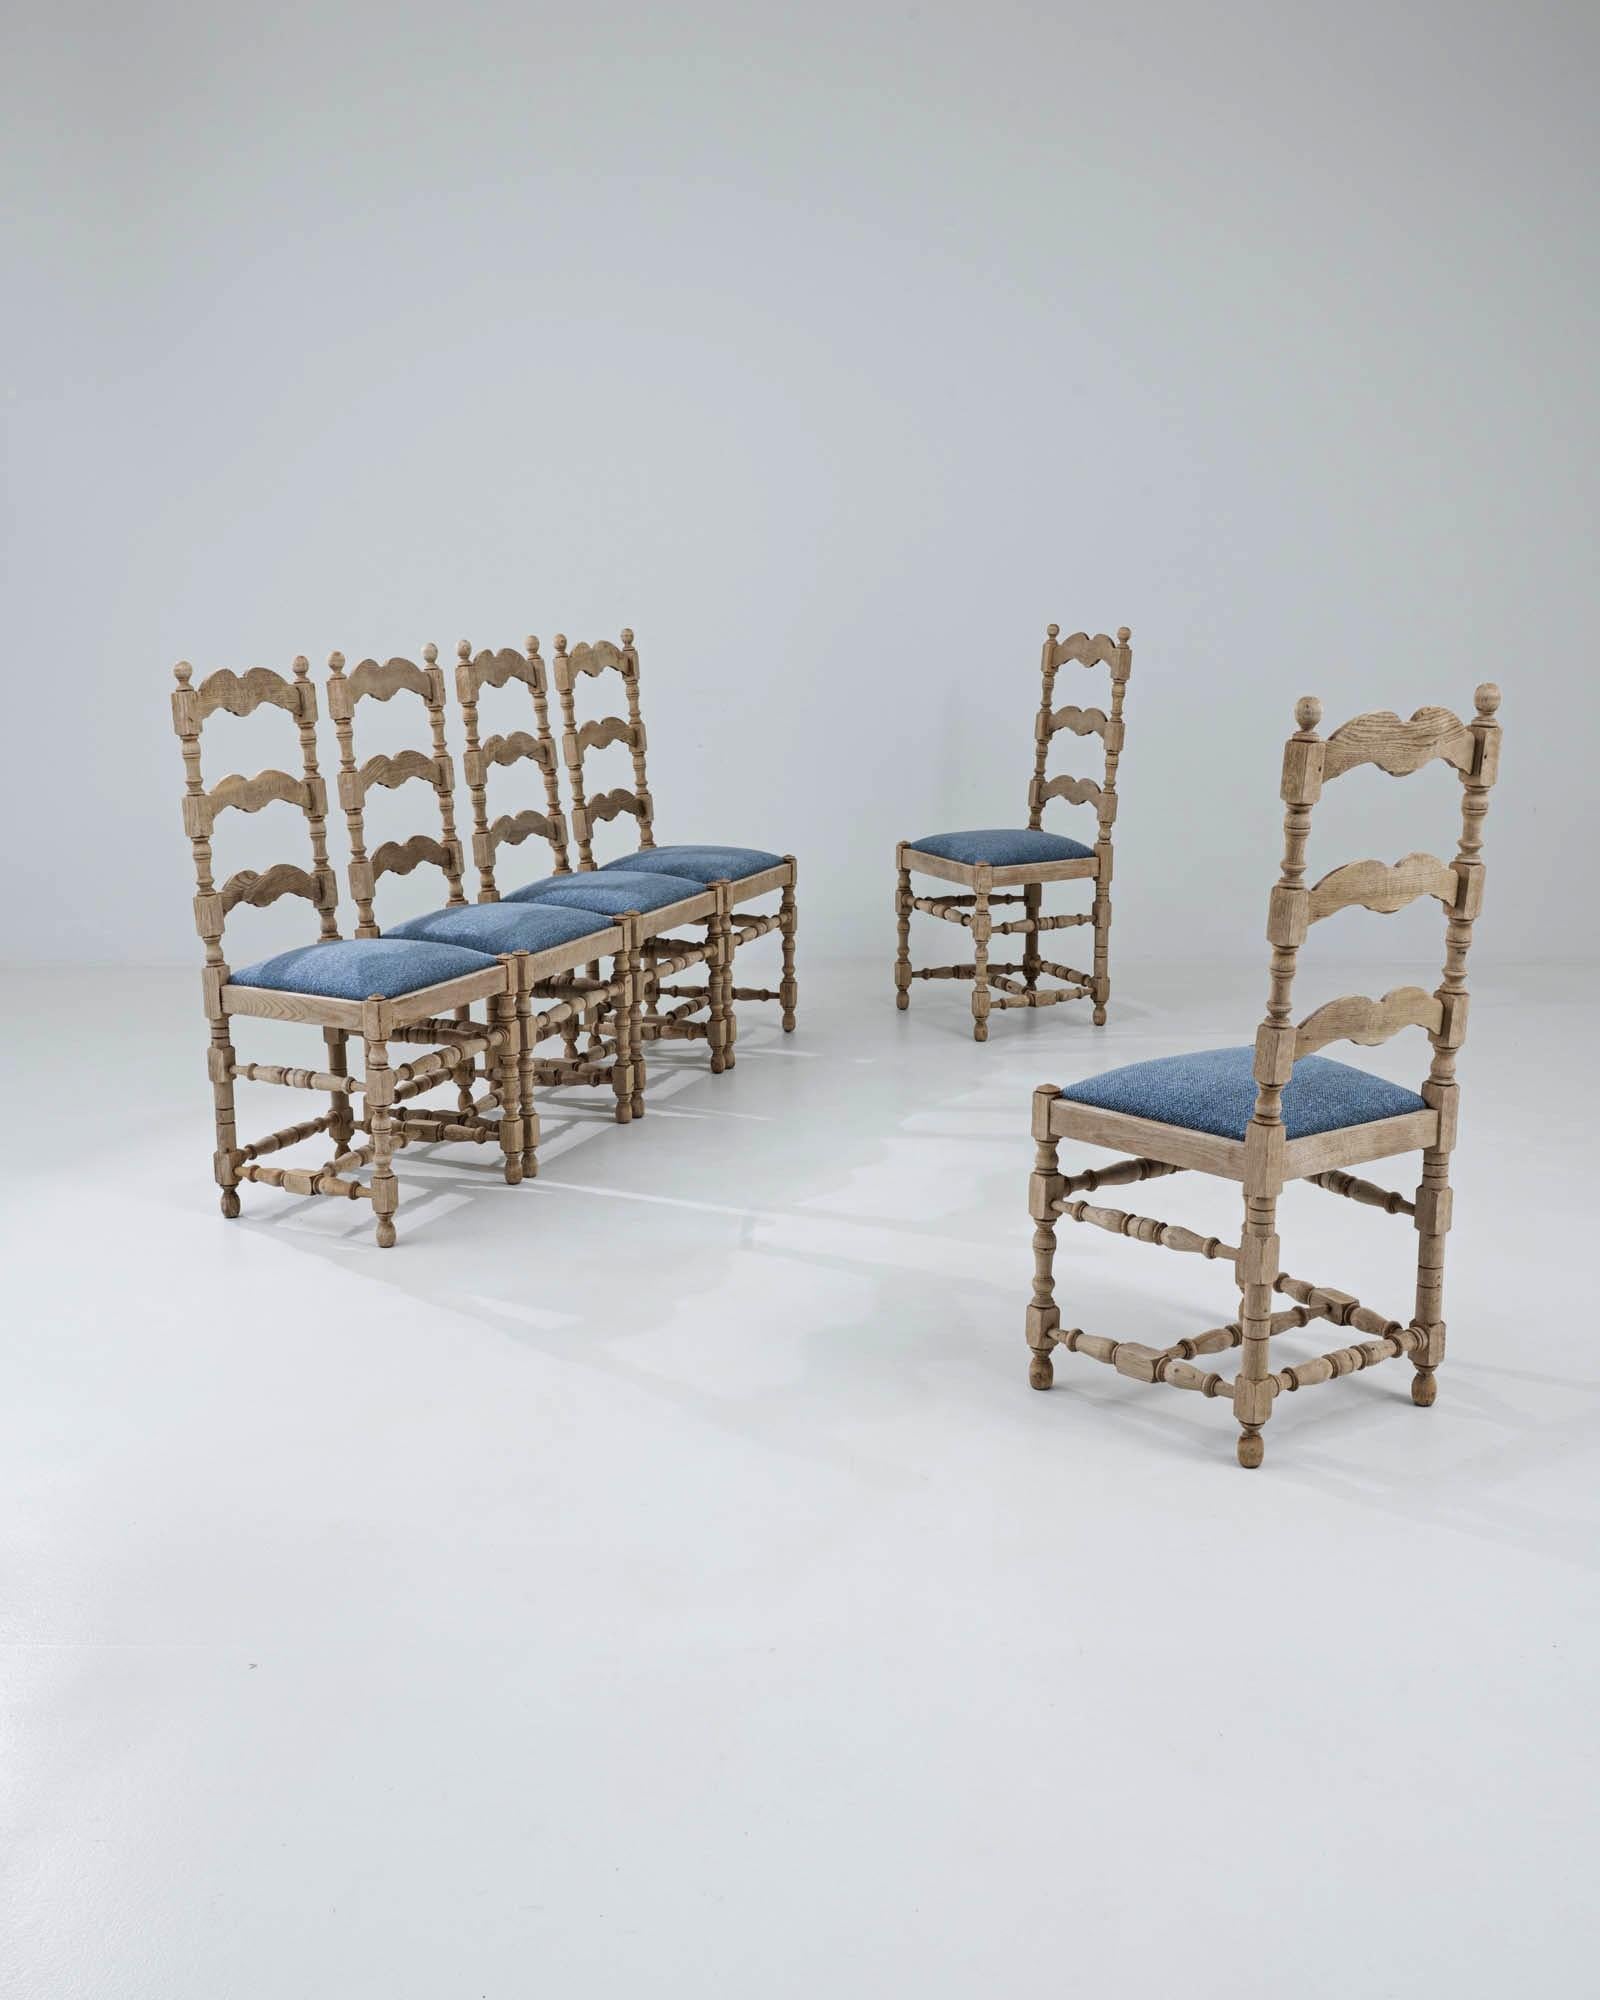 A farmhouse silhouette and refreshing color palette give this set of vintage wooden dining chairs a unique charm. Made in Belgium in the 20th century, contoured ladder backs add a simple yet elegant decorative touch; the lathed legs and stretchers